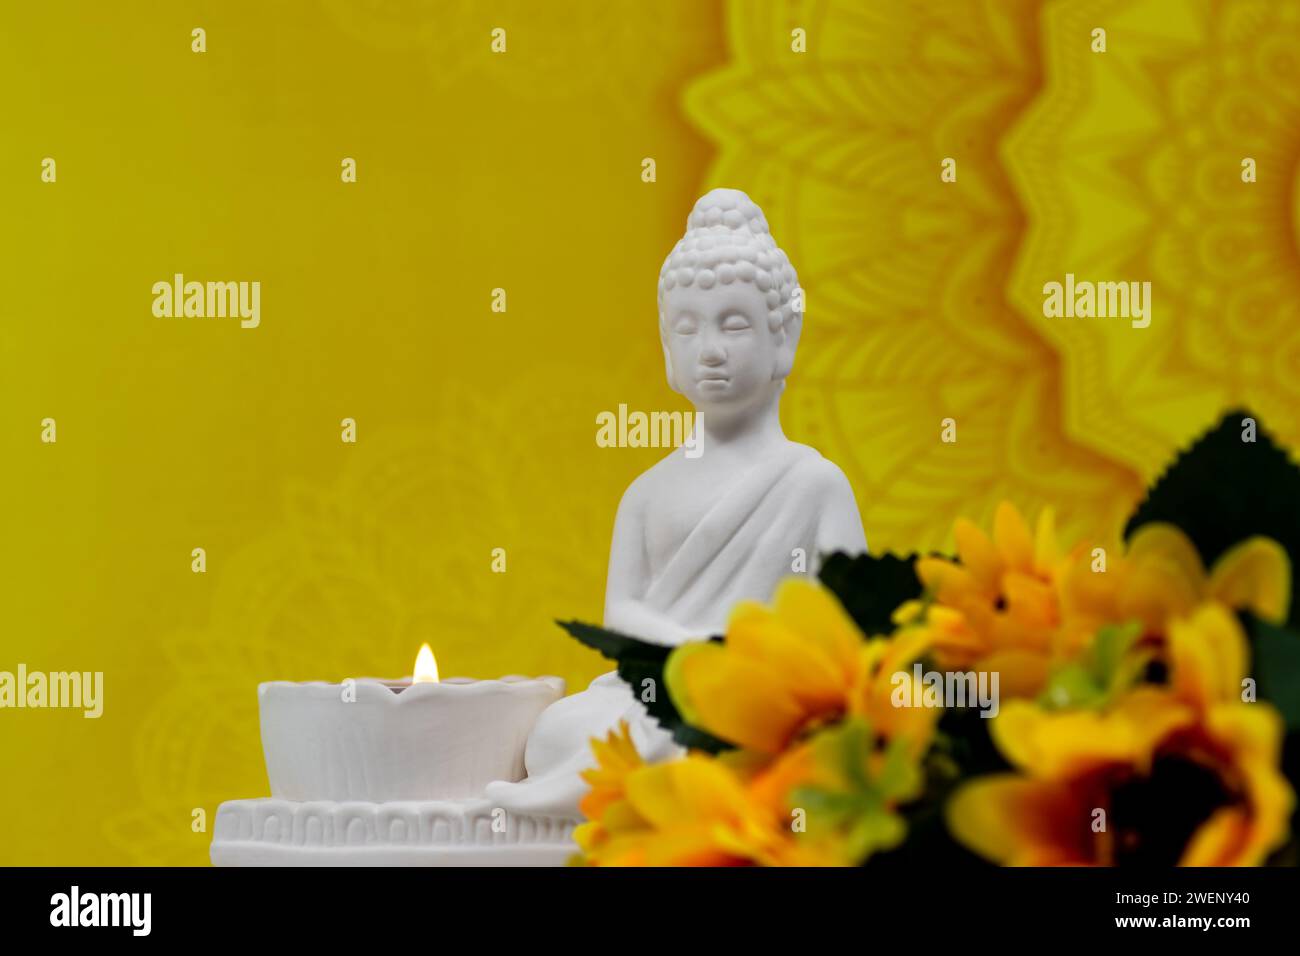 Close up of white marble figurine of Siddhartha Gautama, known as Buddha, with candle burning and decorative flowers, colorful thematic background Stock Photo